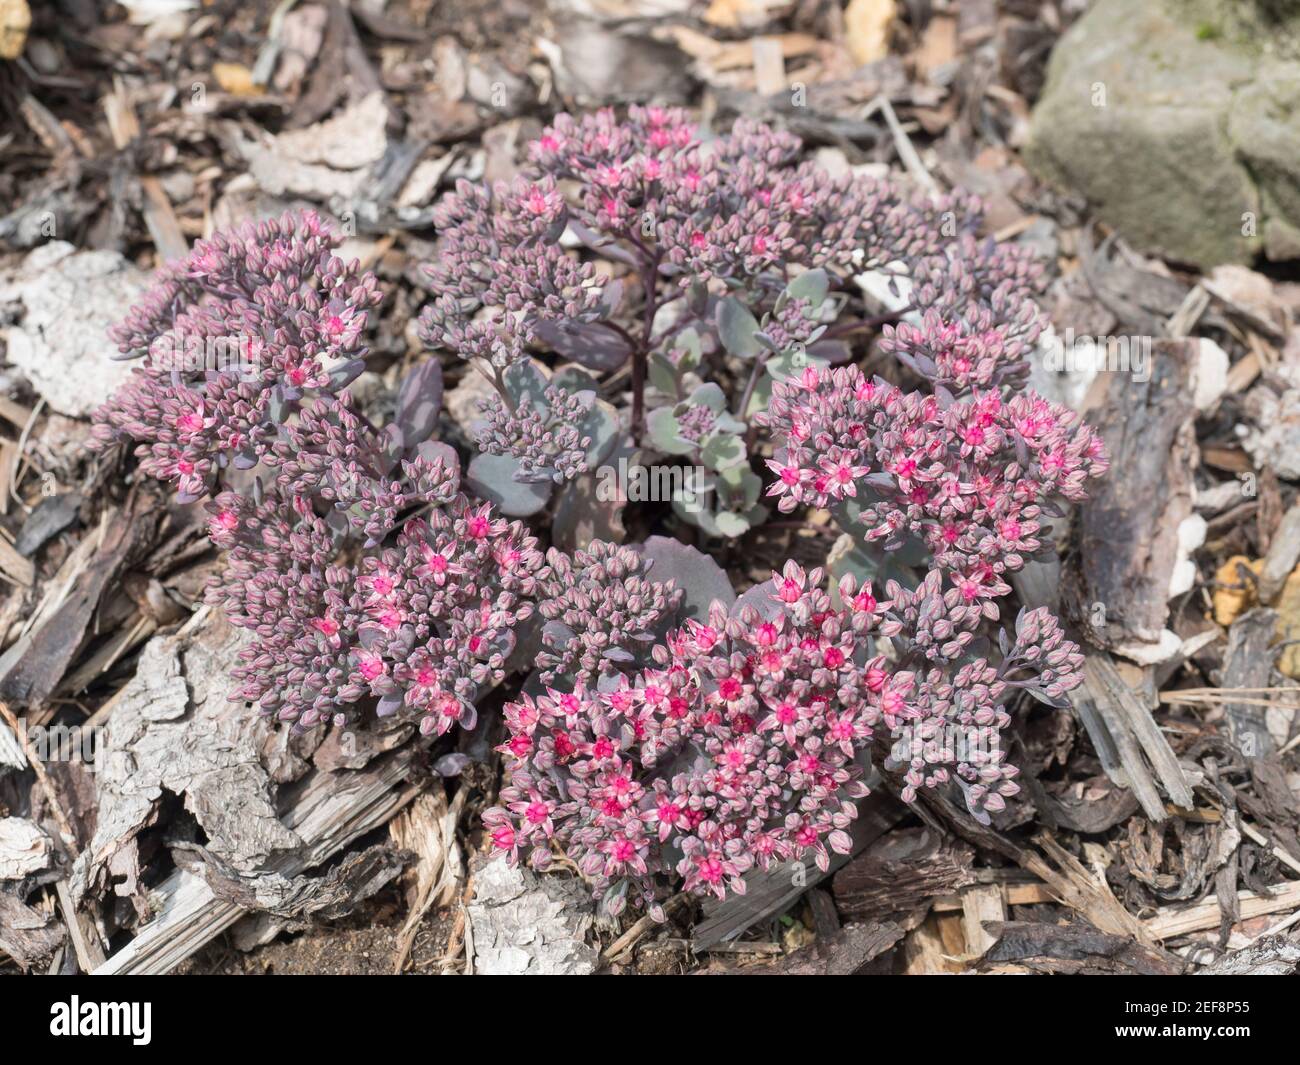 Close up beautiful blooming star shaped pink flowers of Sedum causticola or Stonecrop, a succulent groundcover that flowers in summer and autumn. Top Stock Photo